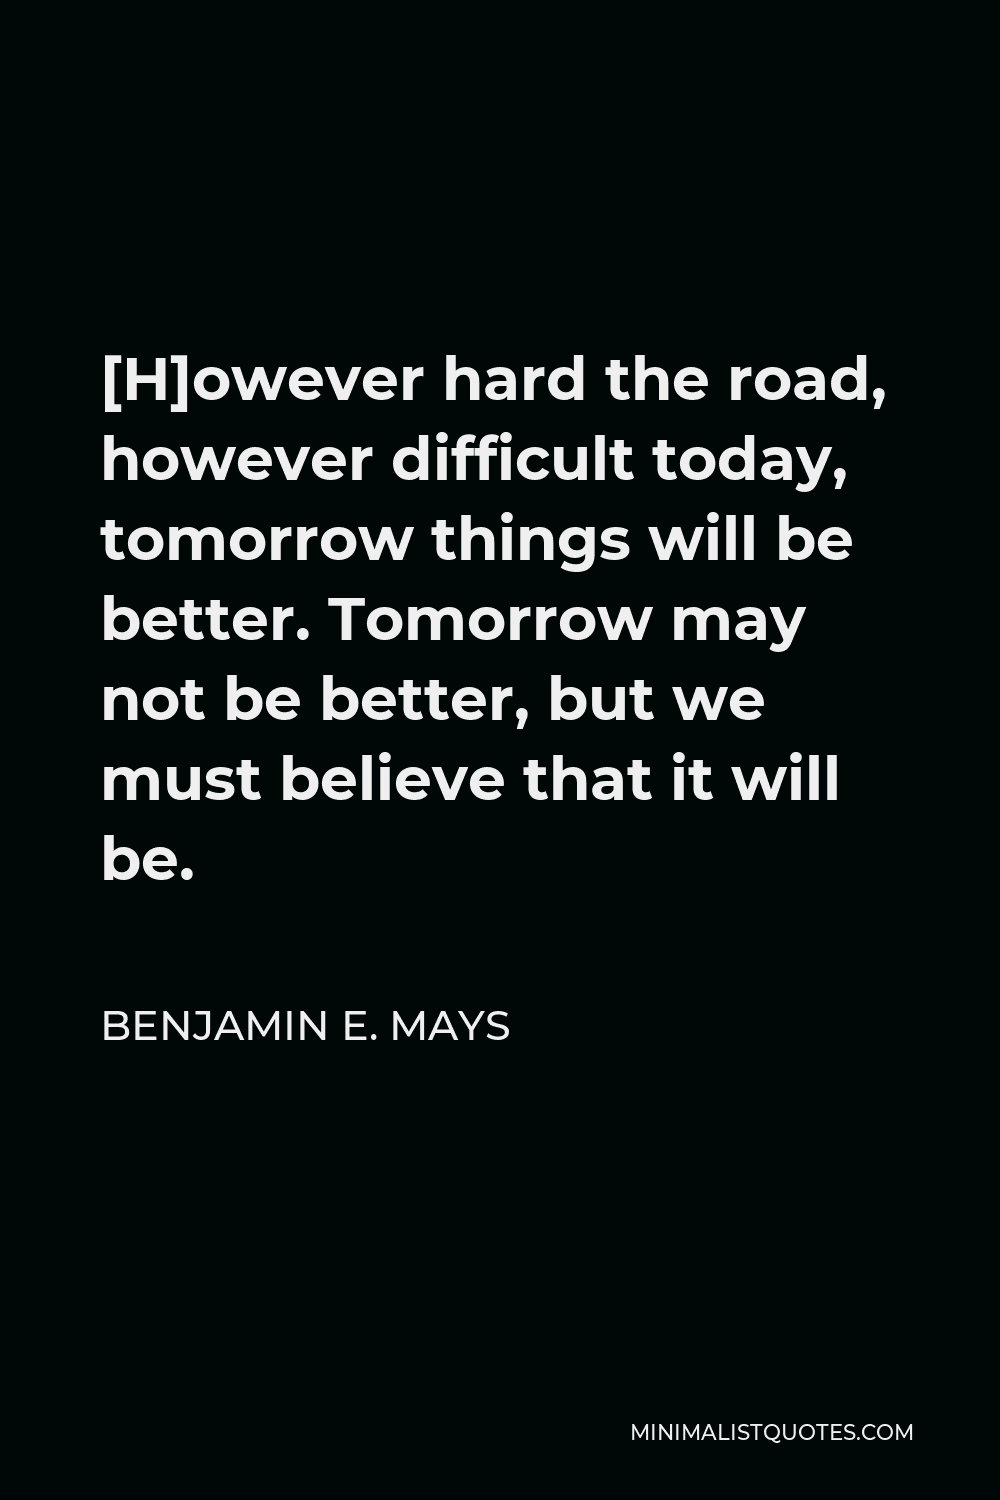 Benjamin E. Mays Quote - [H]owever hard the road, however difficult today, tomorrow things will be better. Tomorrow may not be better, but we must believe that it will be.